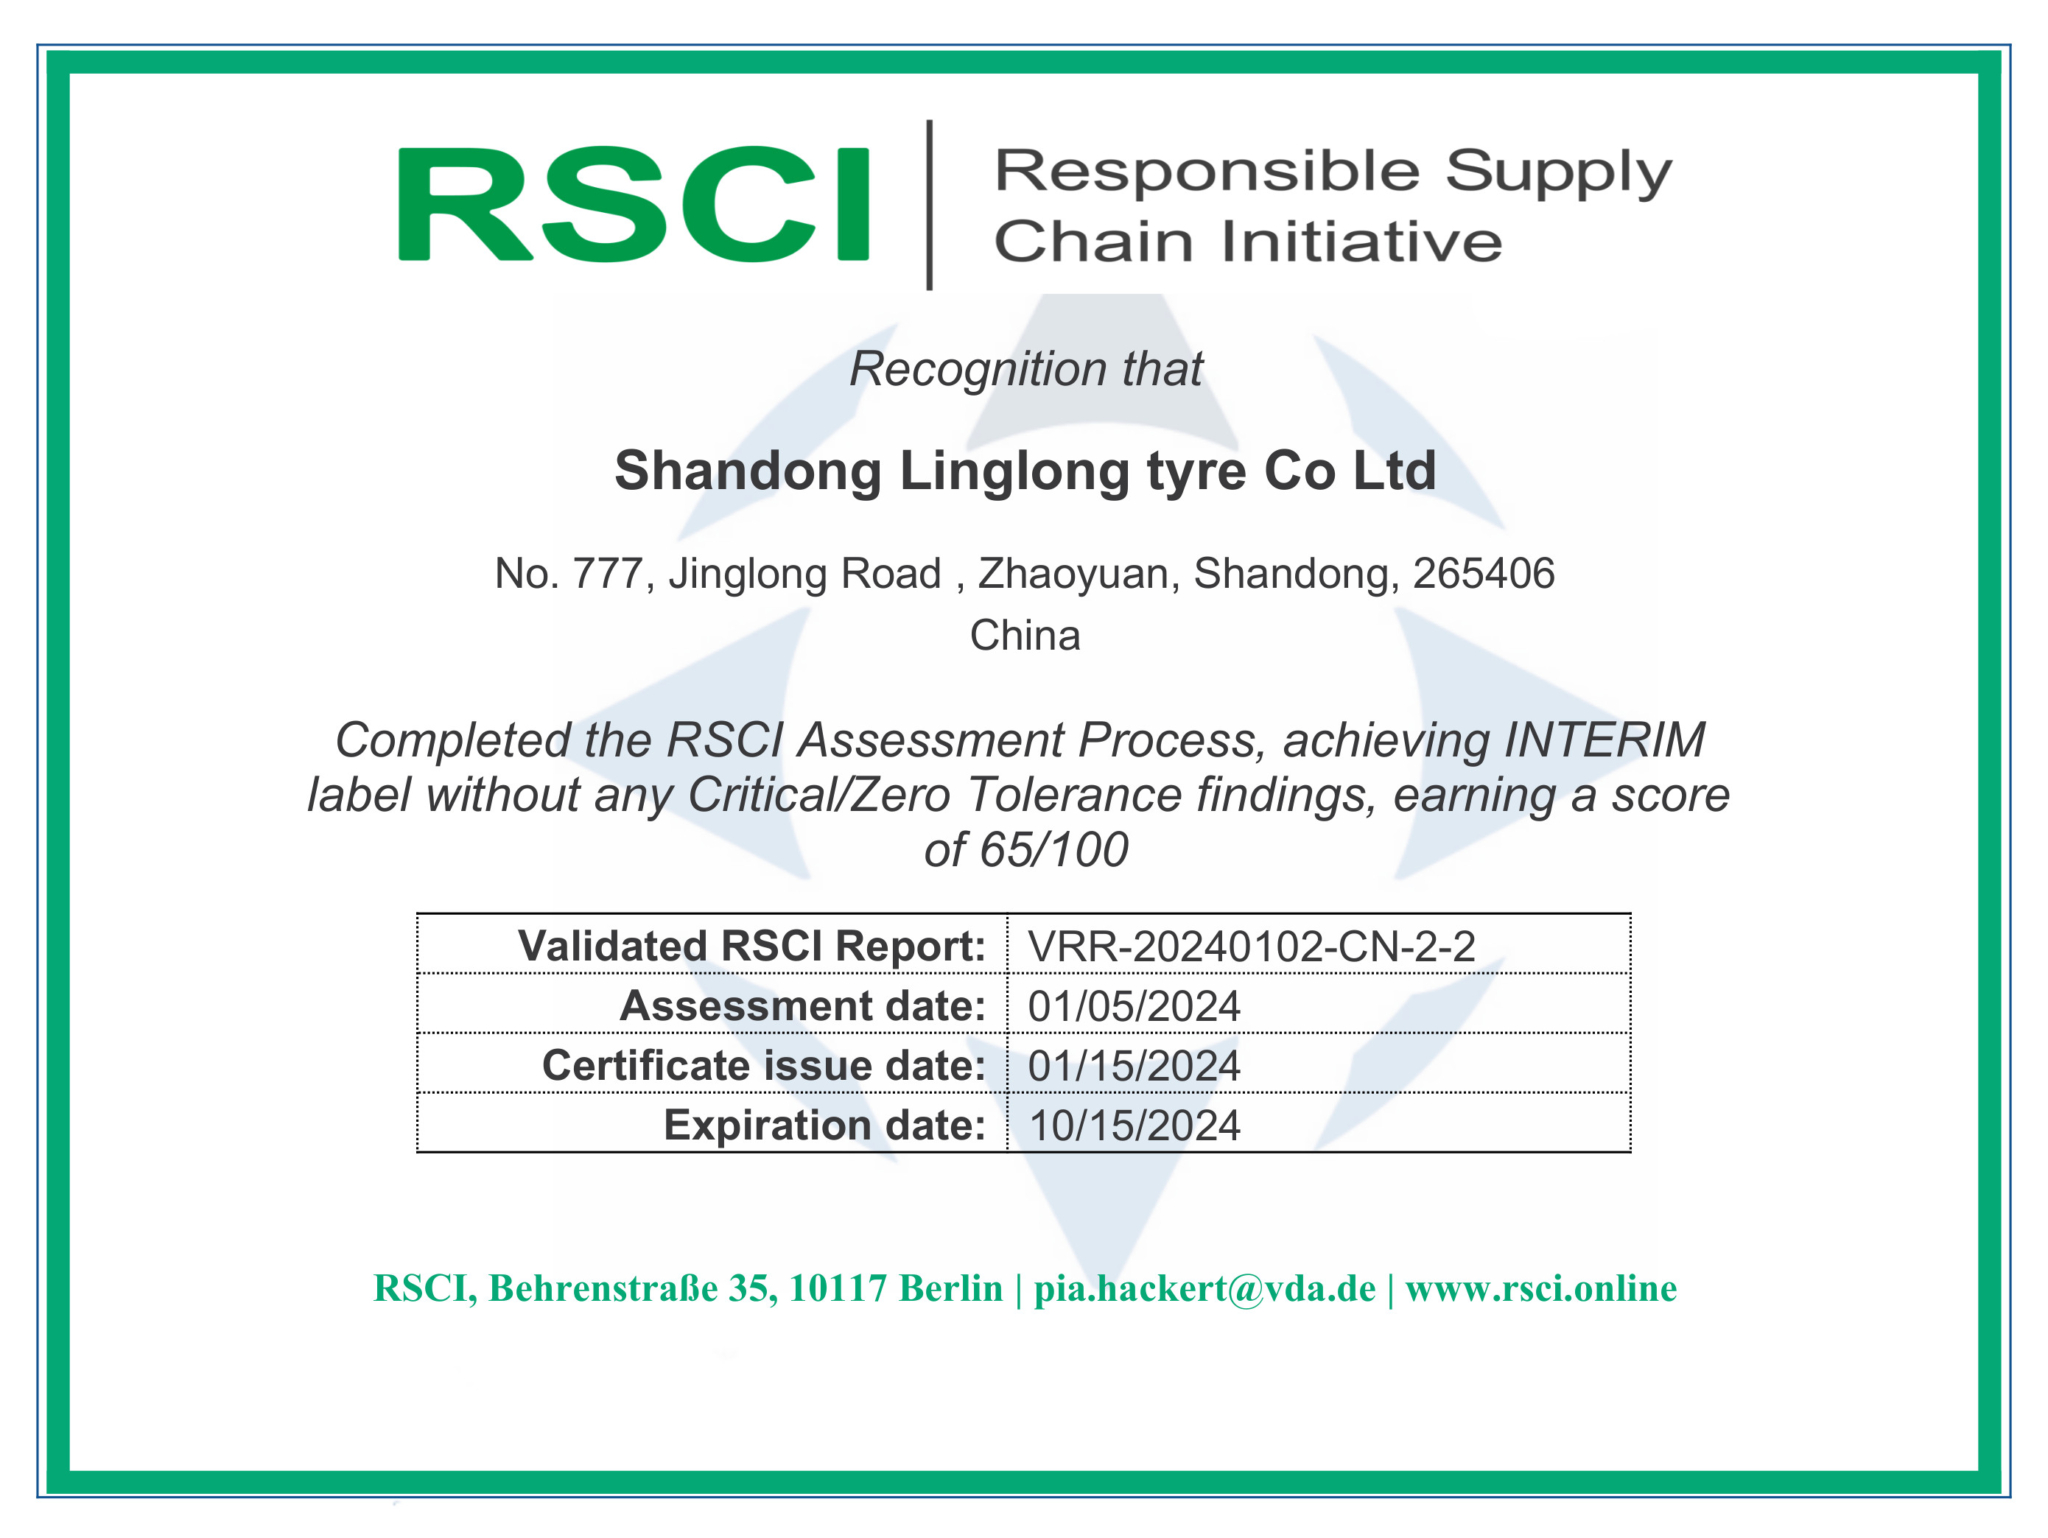 Linglong certified by Responsible Supply Chain Initiative